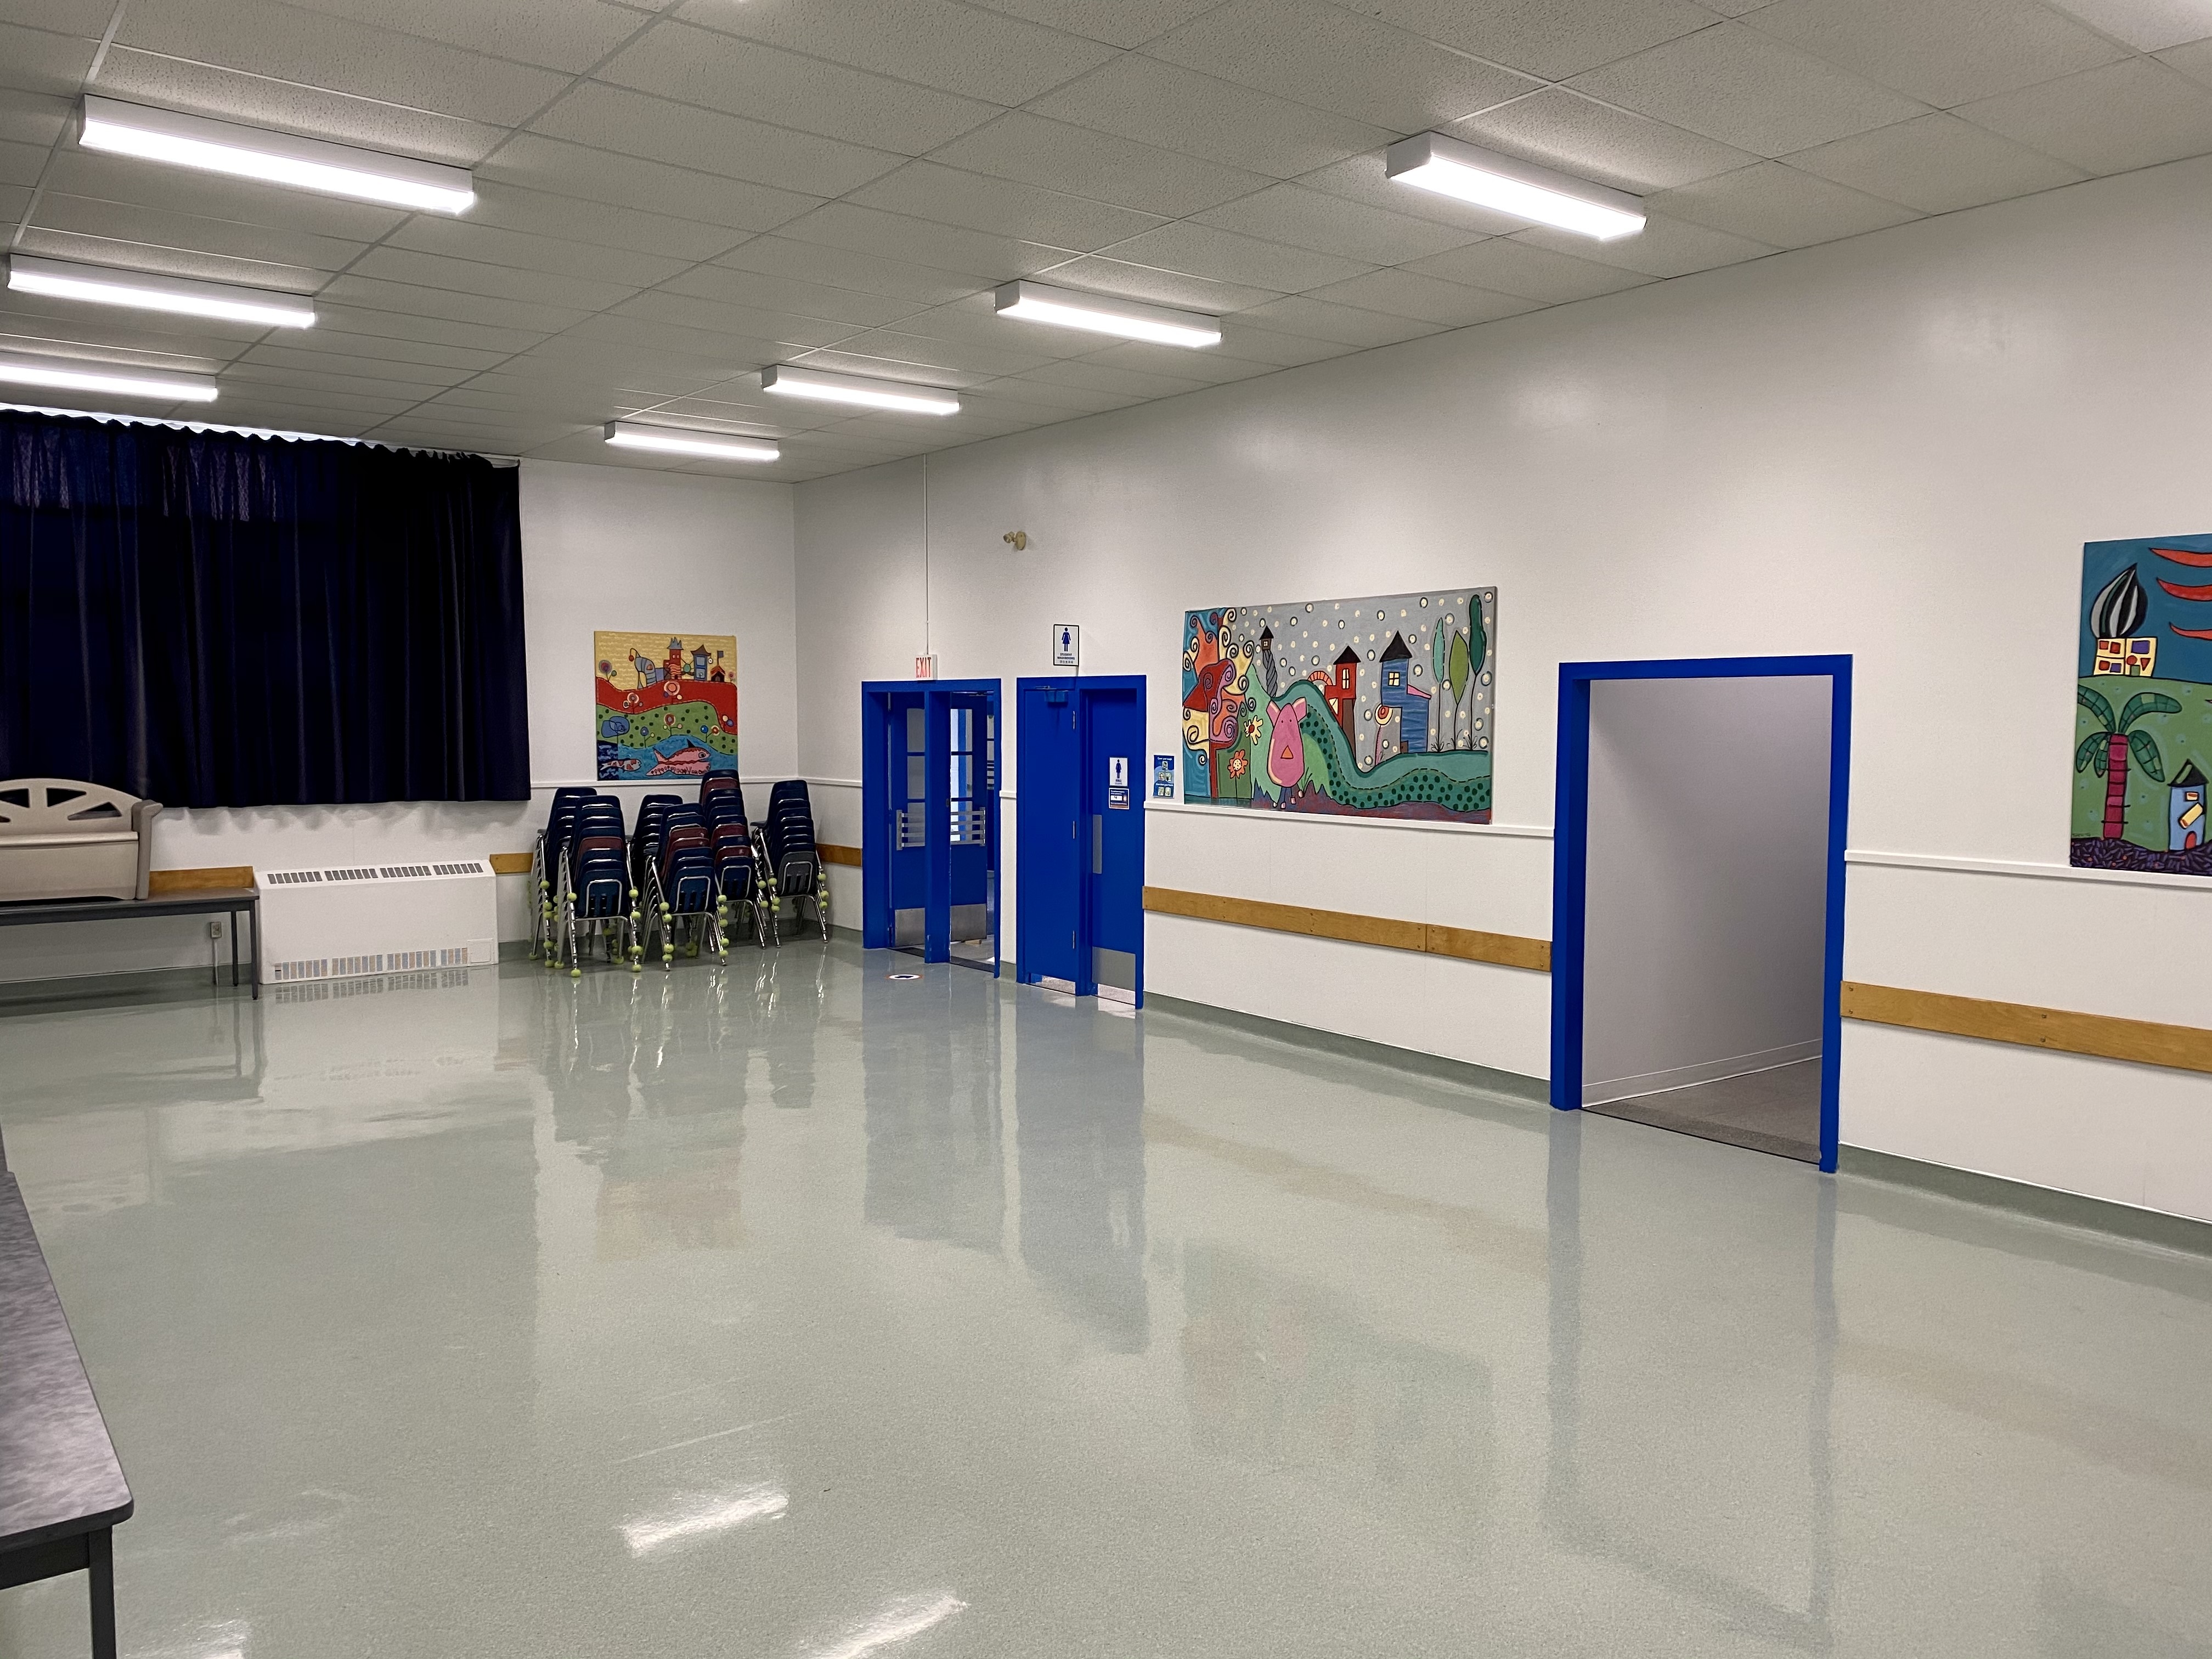 We have two large rooms that can be used for in-school field trips, meetings and large group activities.